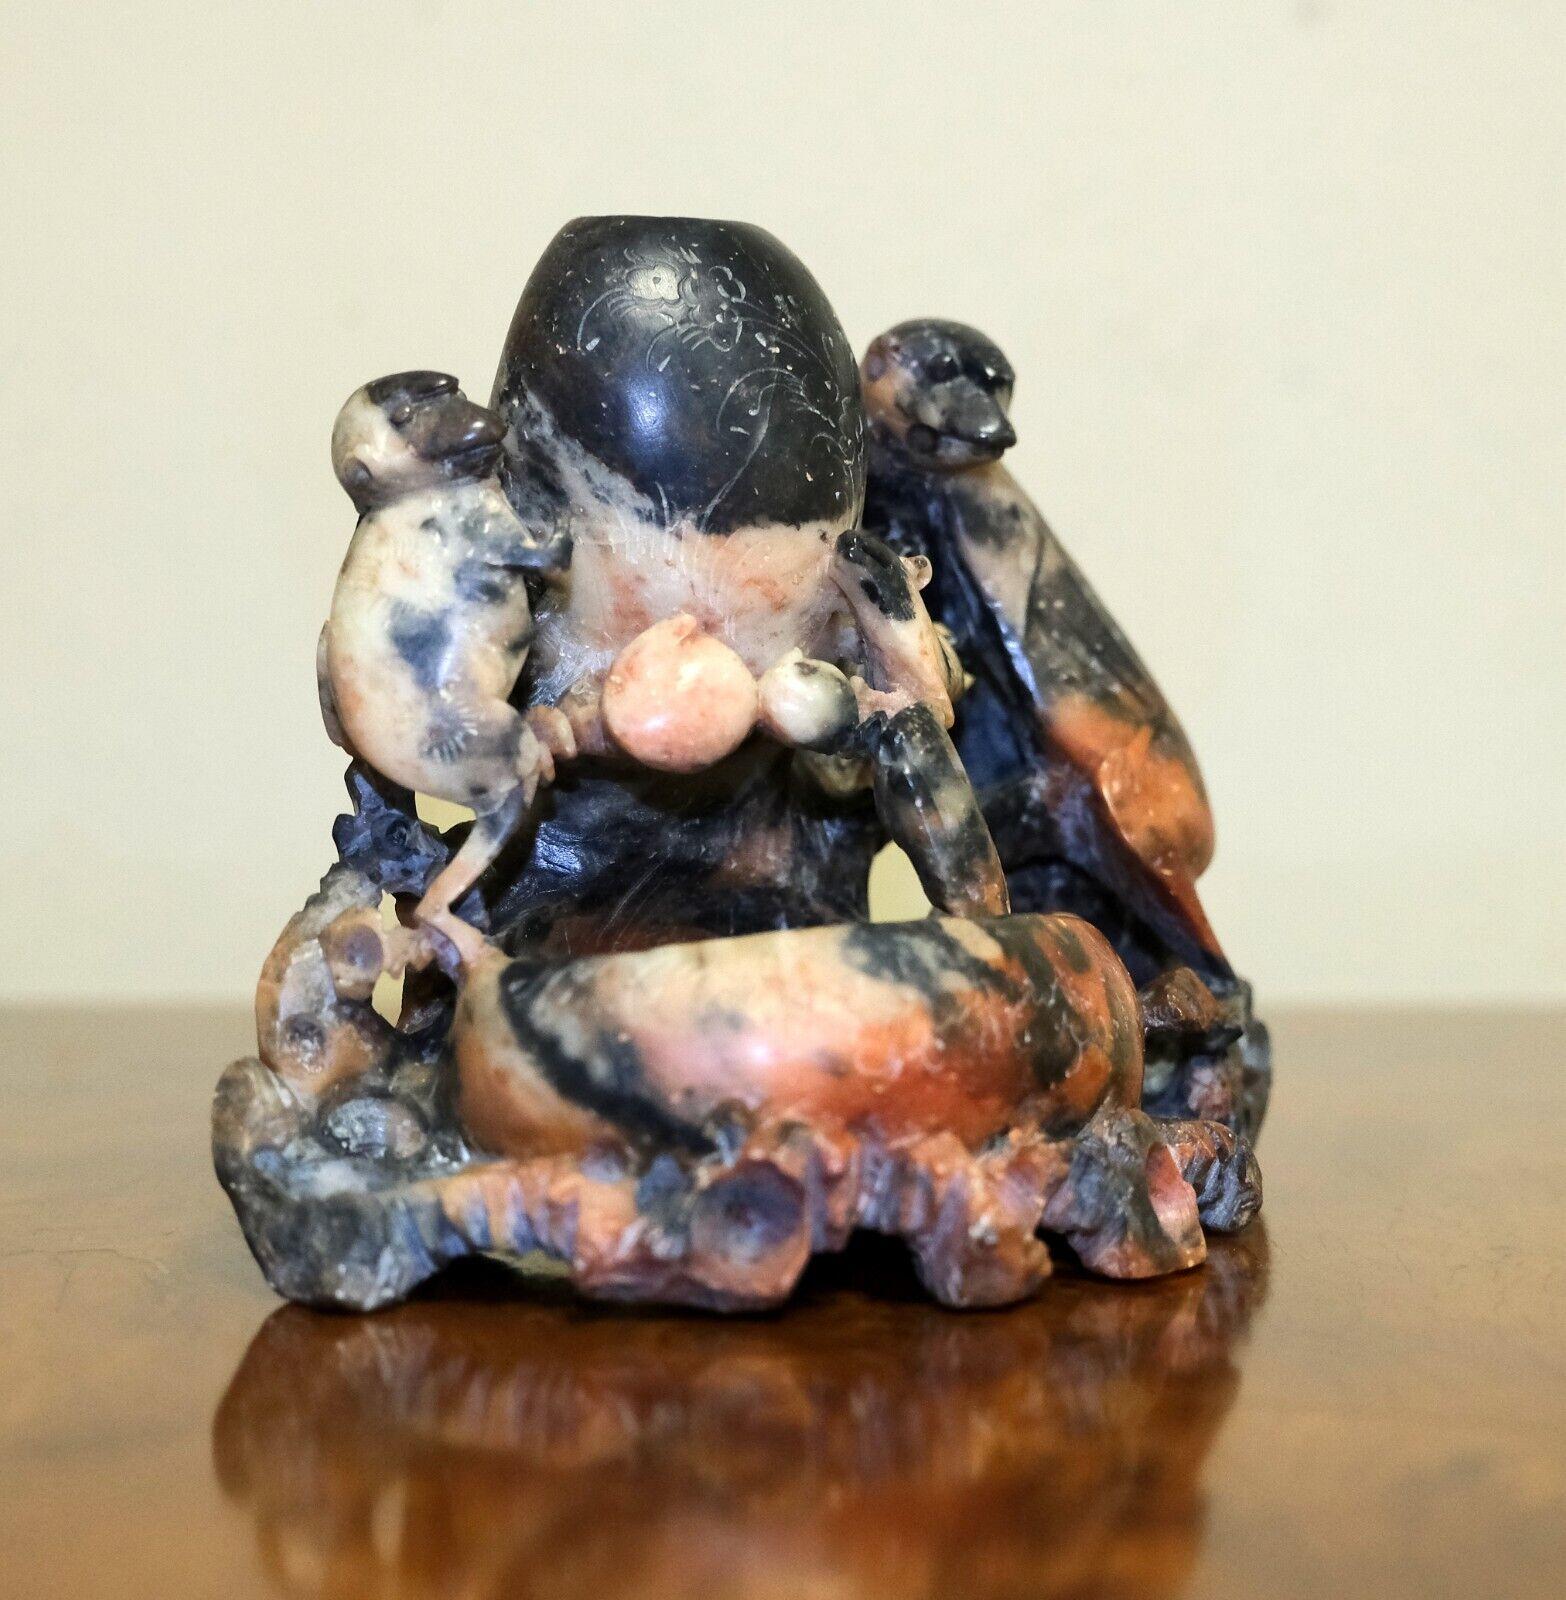 We are delighted to offer for sale this lovely early 20th century Chinese hand carved soapstone small figure sculpture.

This is a good example of a Chinese hand-carved figure with a nature scene showing a pair of monkeys. The item can be used just